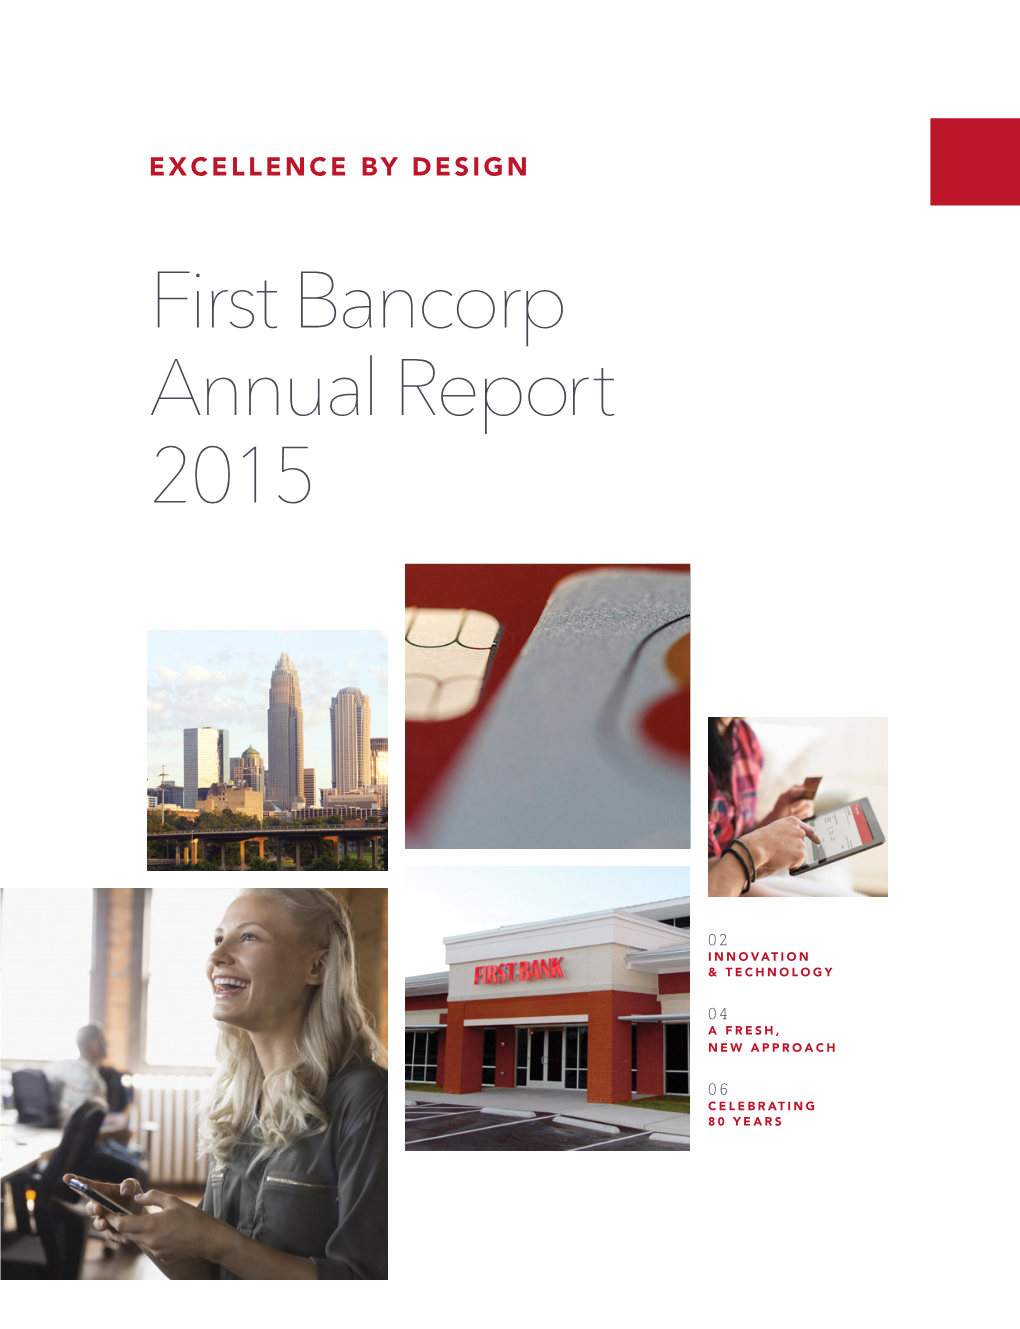 First Bancorp Annual Report 2015